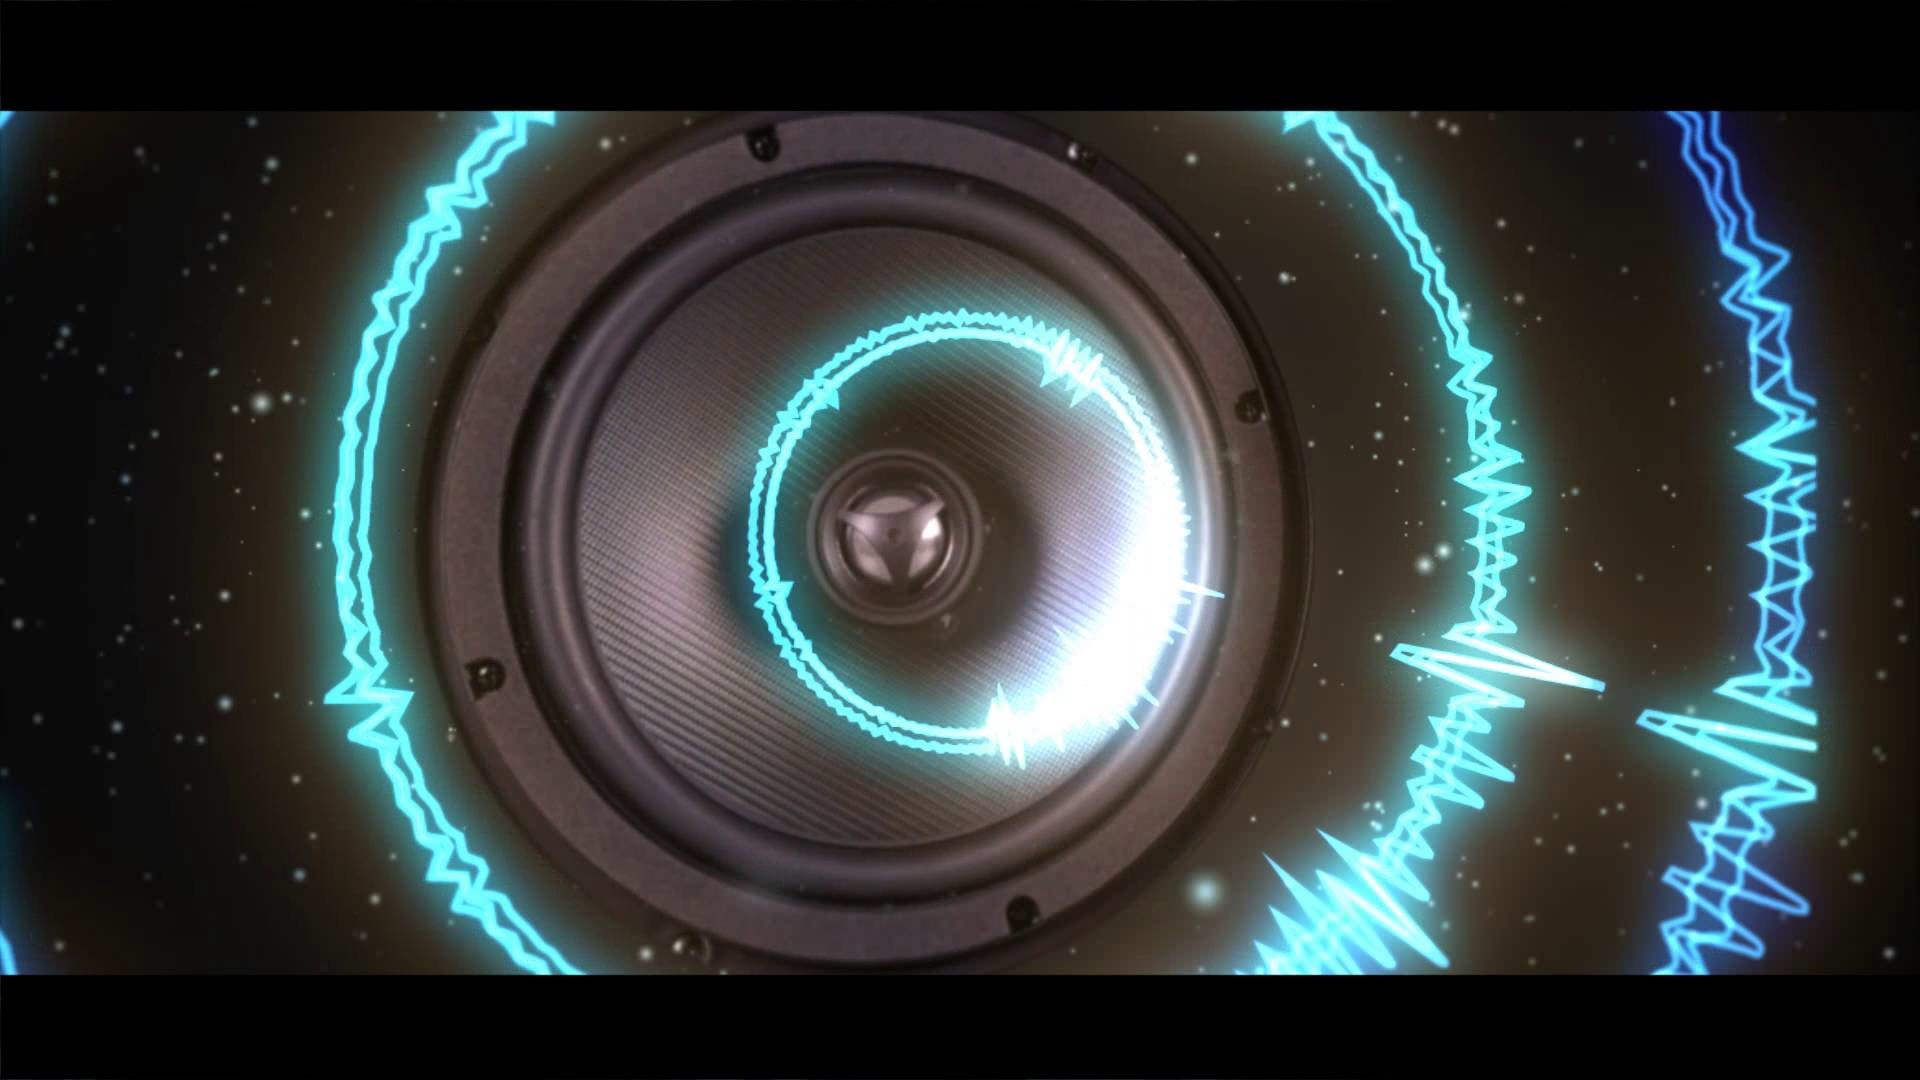 1920x1080 Subwoofer Sounds for Adobe After Effects CS6 (Audio visualization)